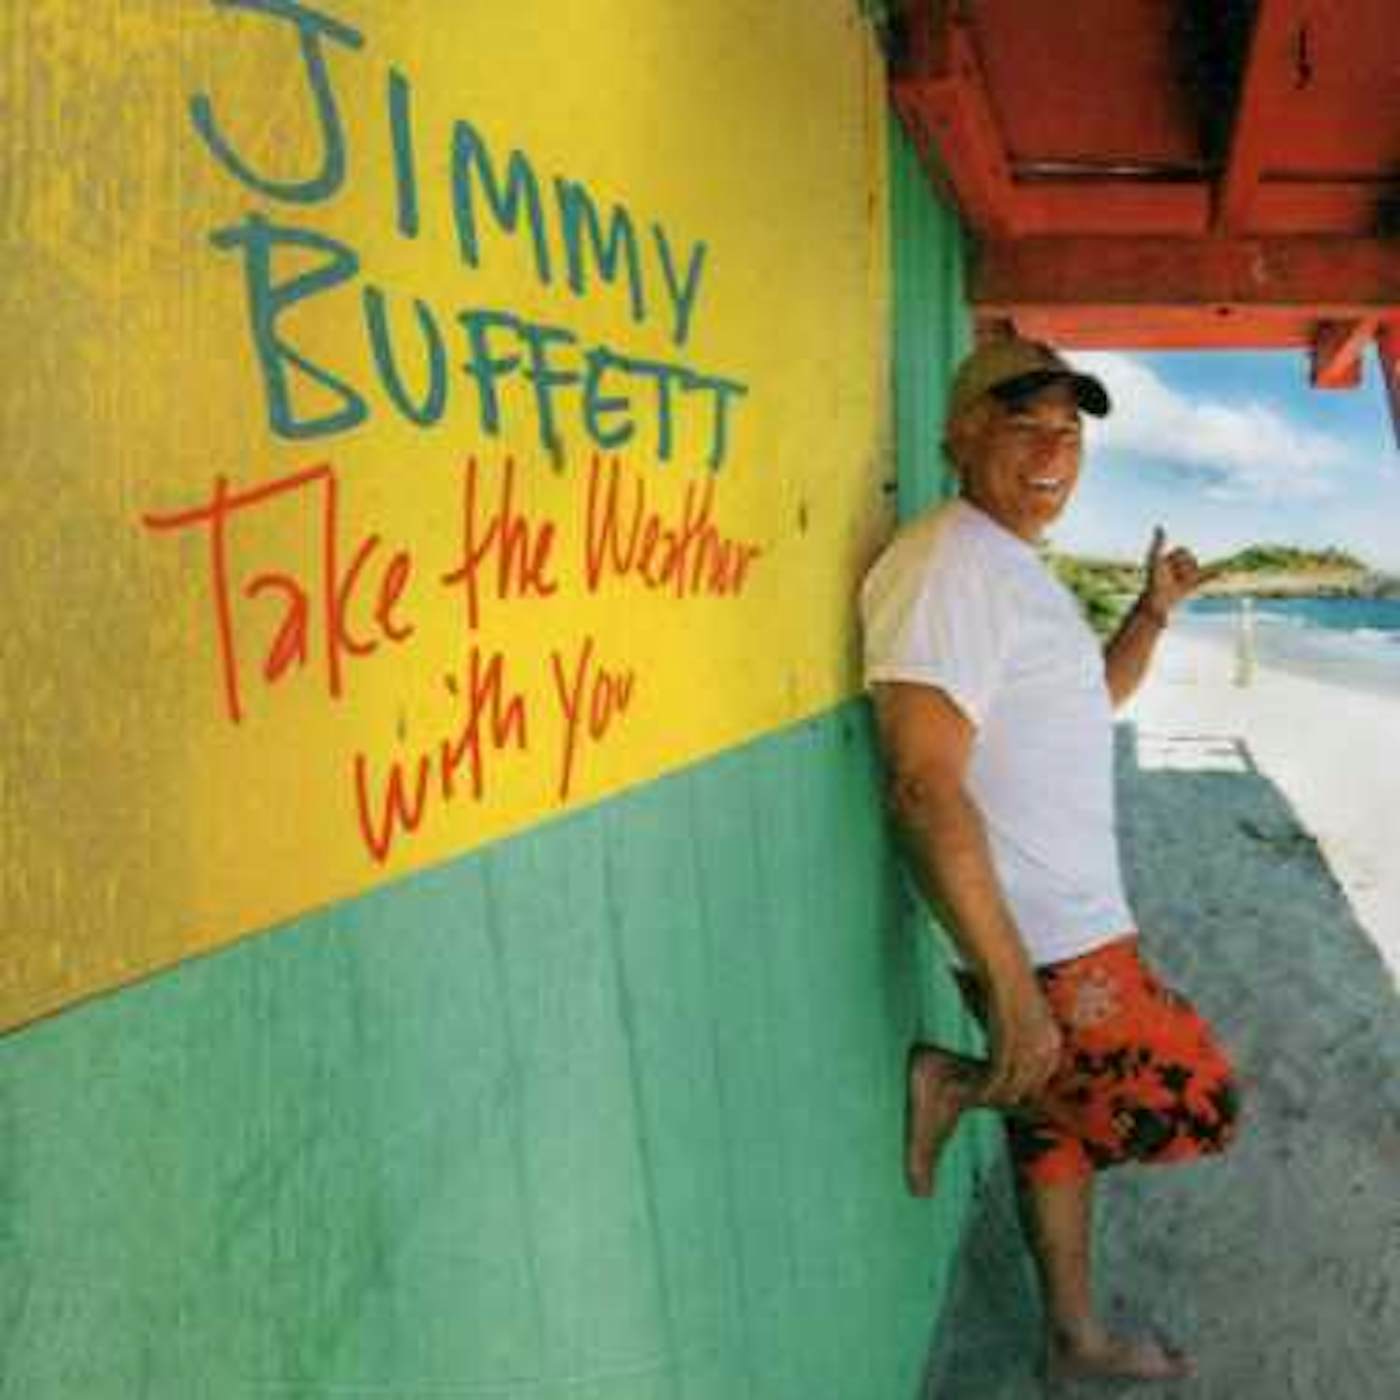 Jimmy Buffett TAKE THE WEATHER WITH YOU CD